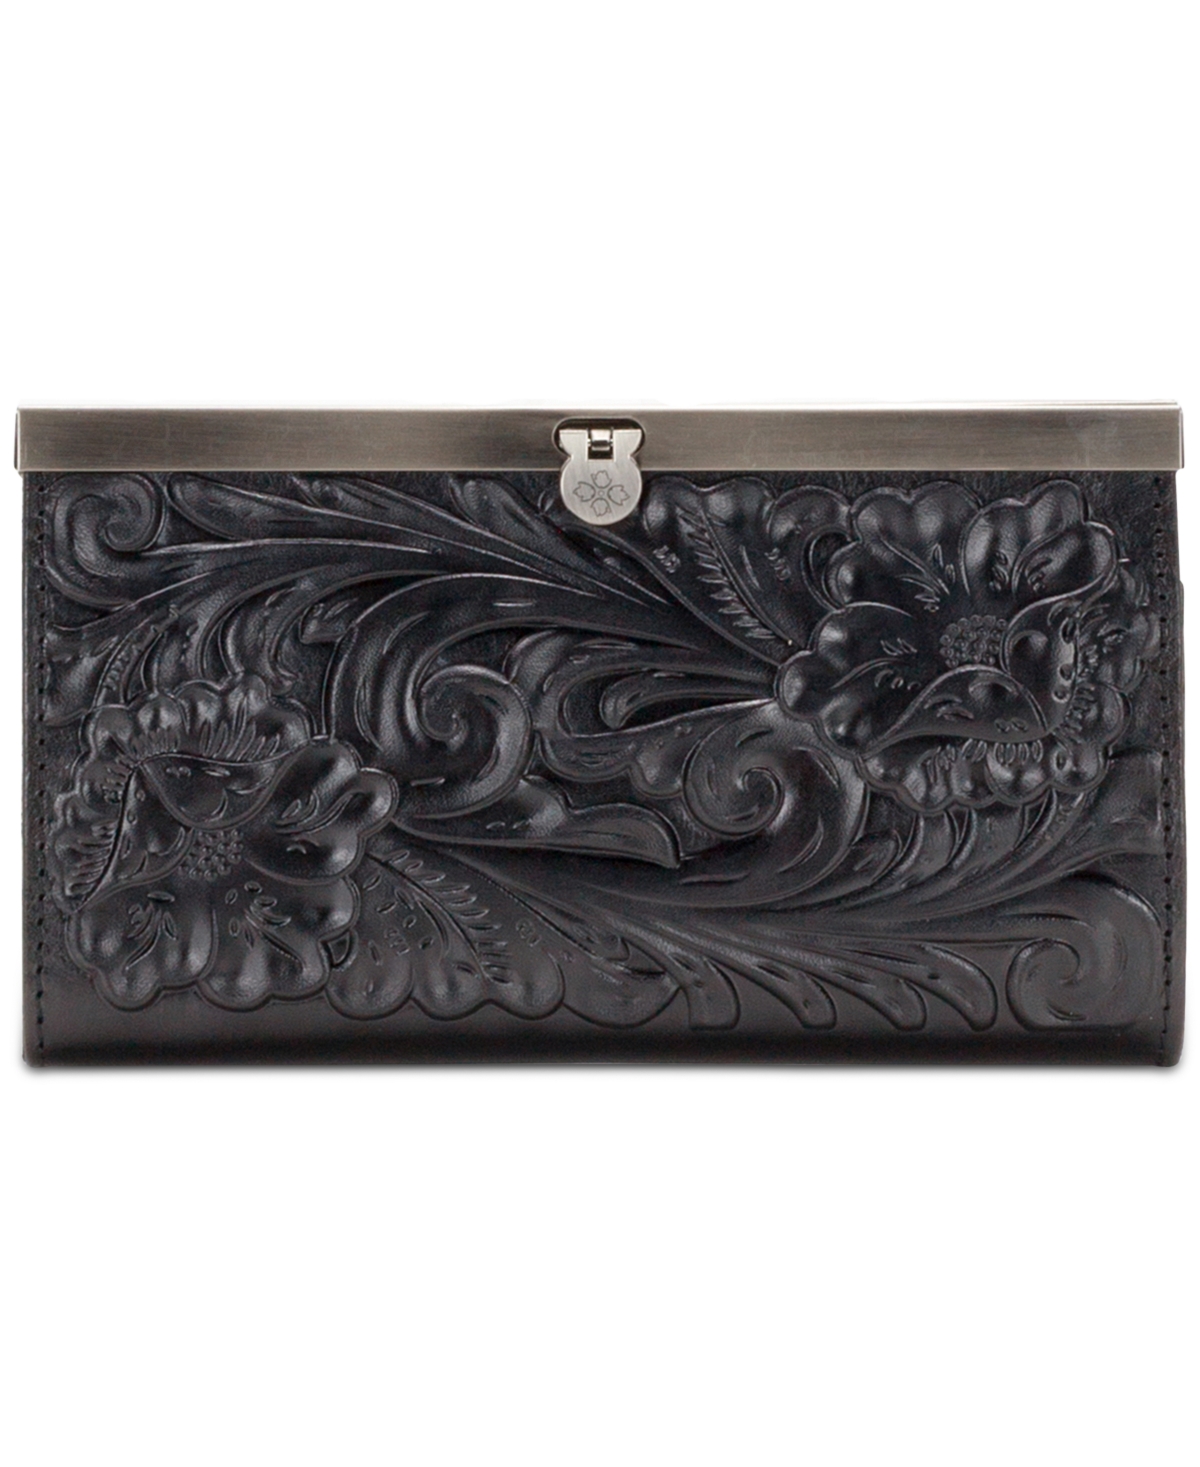 Patricia Nash Cauchy Tooled Leather Wallet In Black,silver